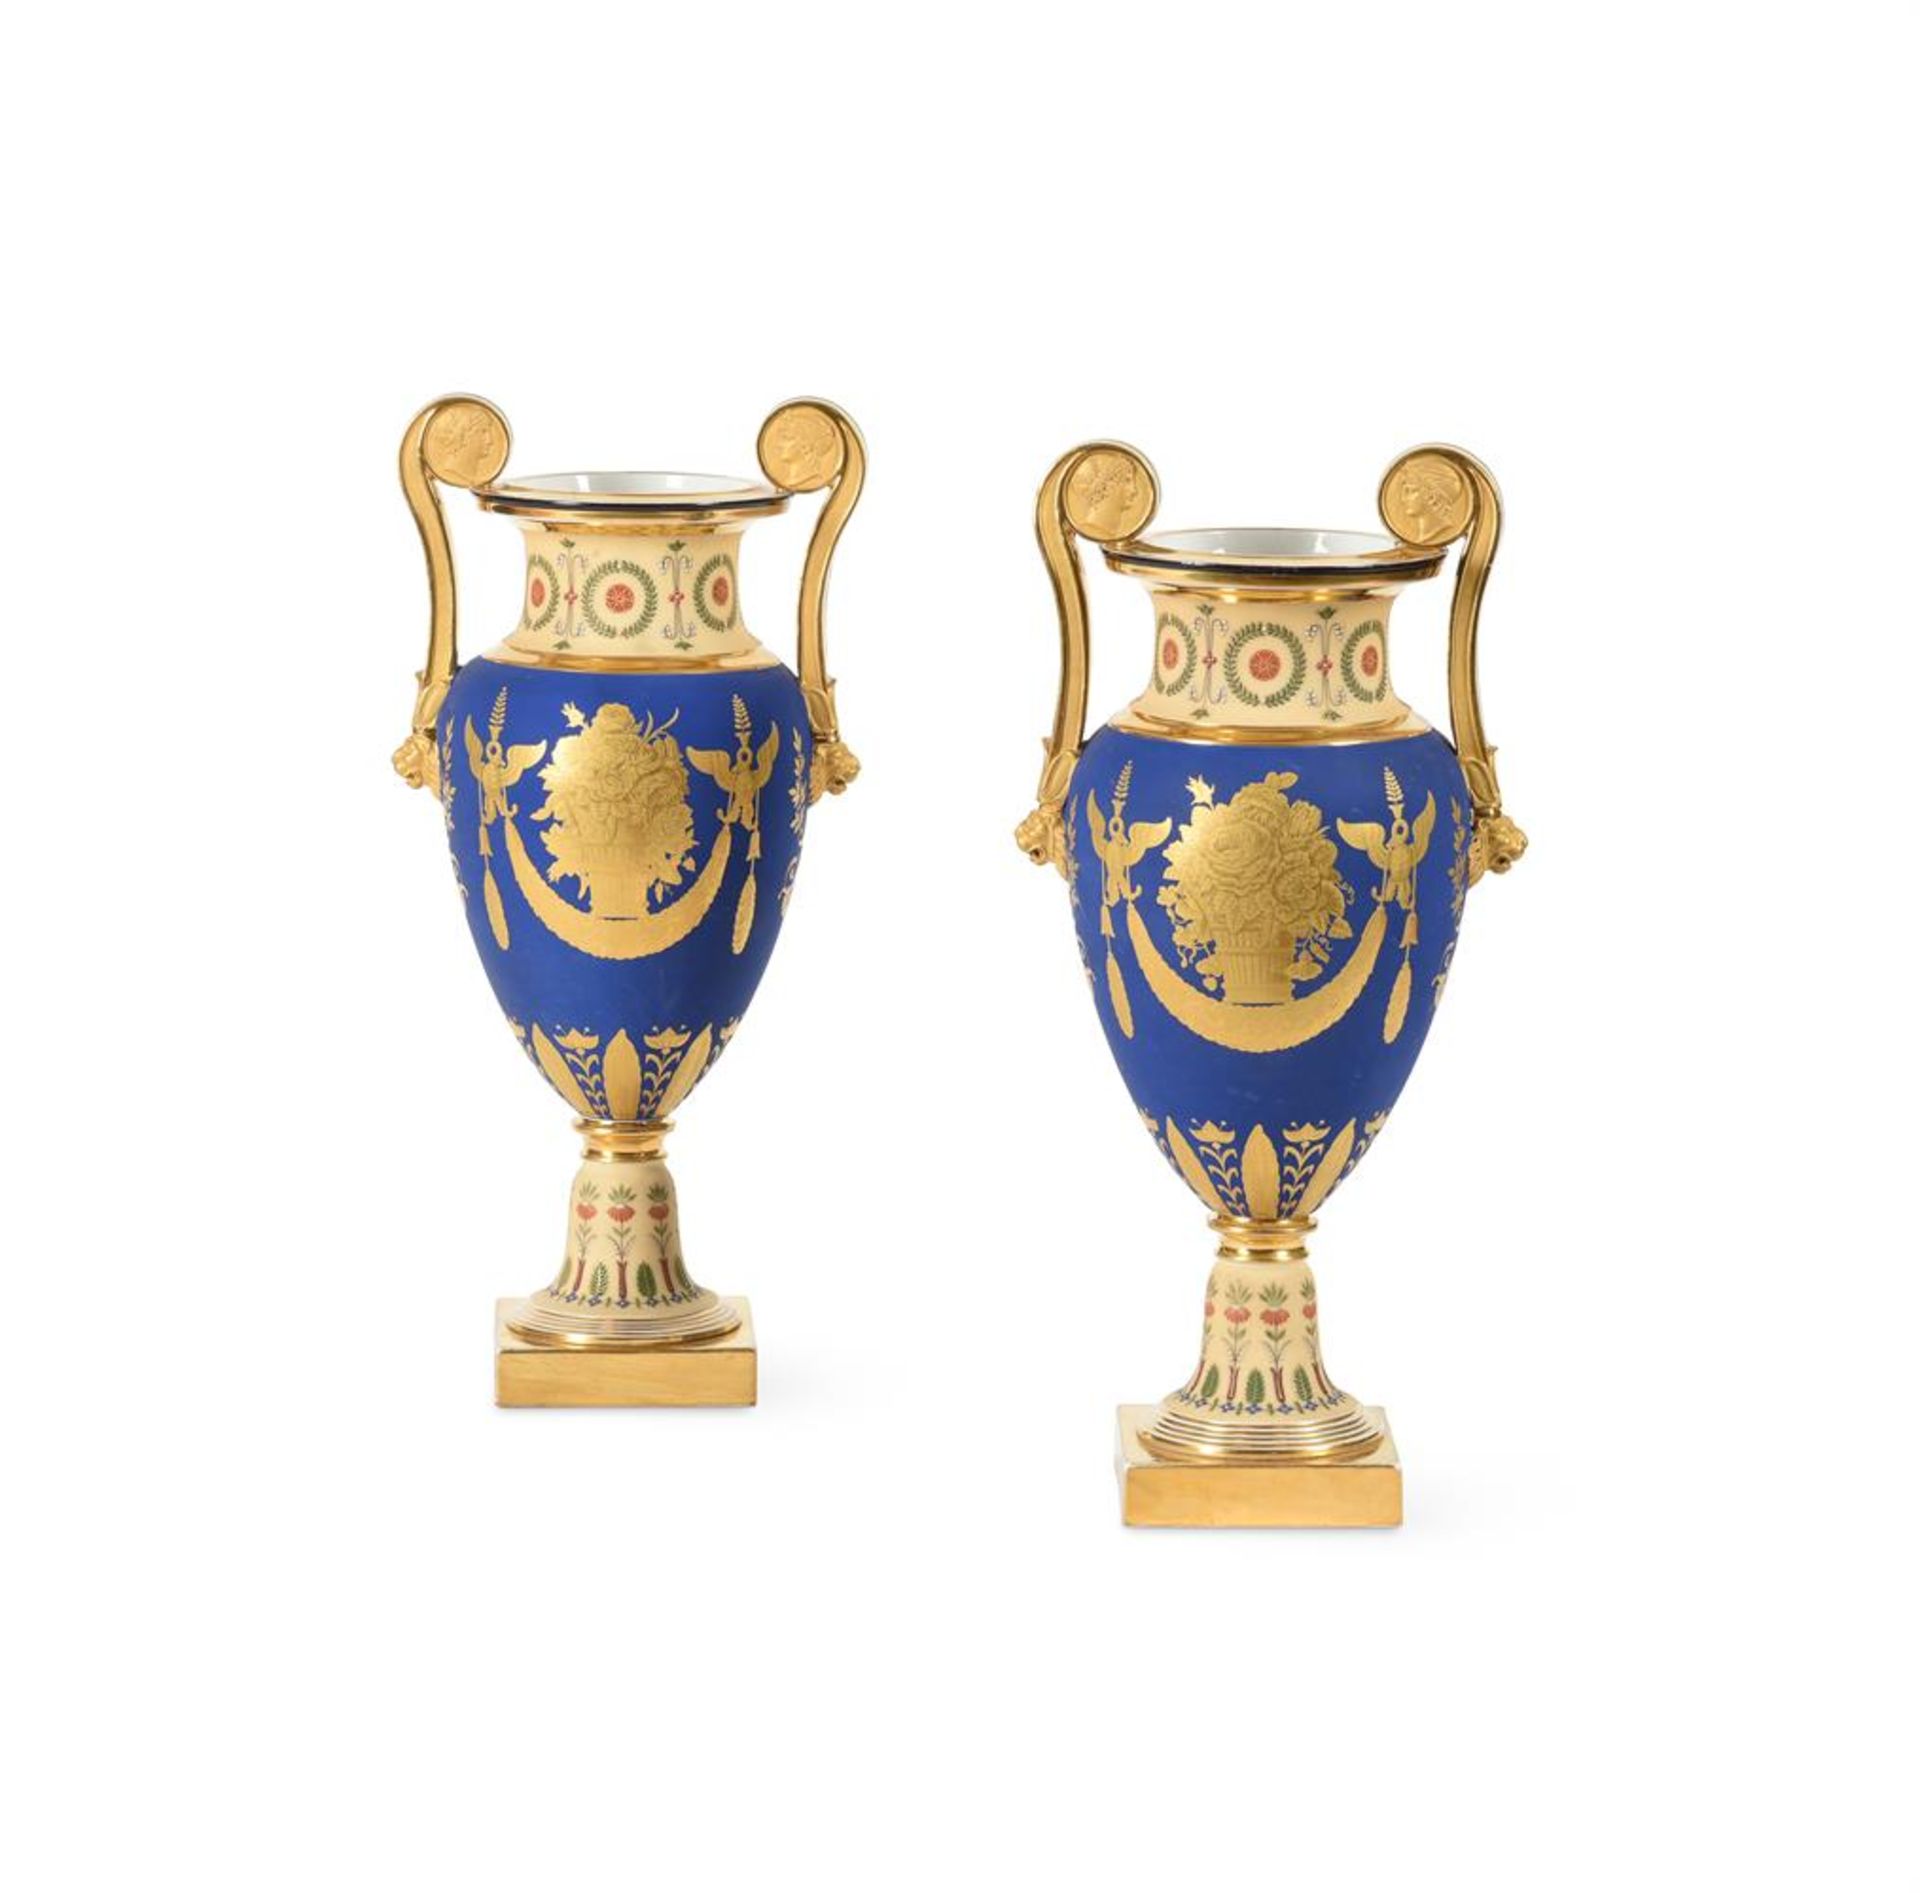 PAIR OF PARIS PORCELAIN (NAST) TWO-HANDLED EMPIRE-STYLE URNS, CIRCA 1820